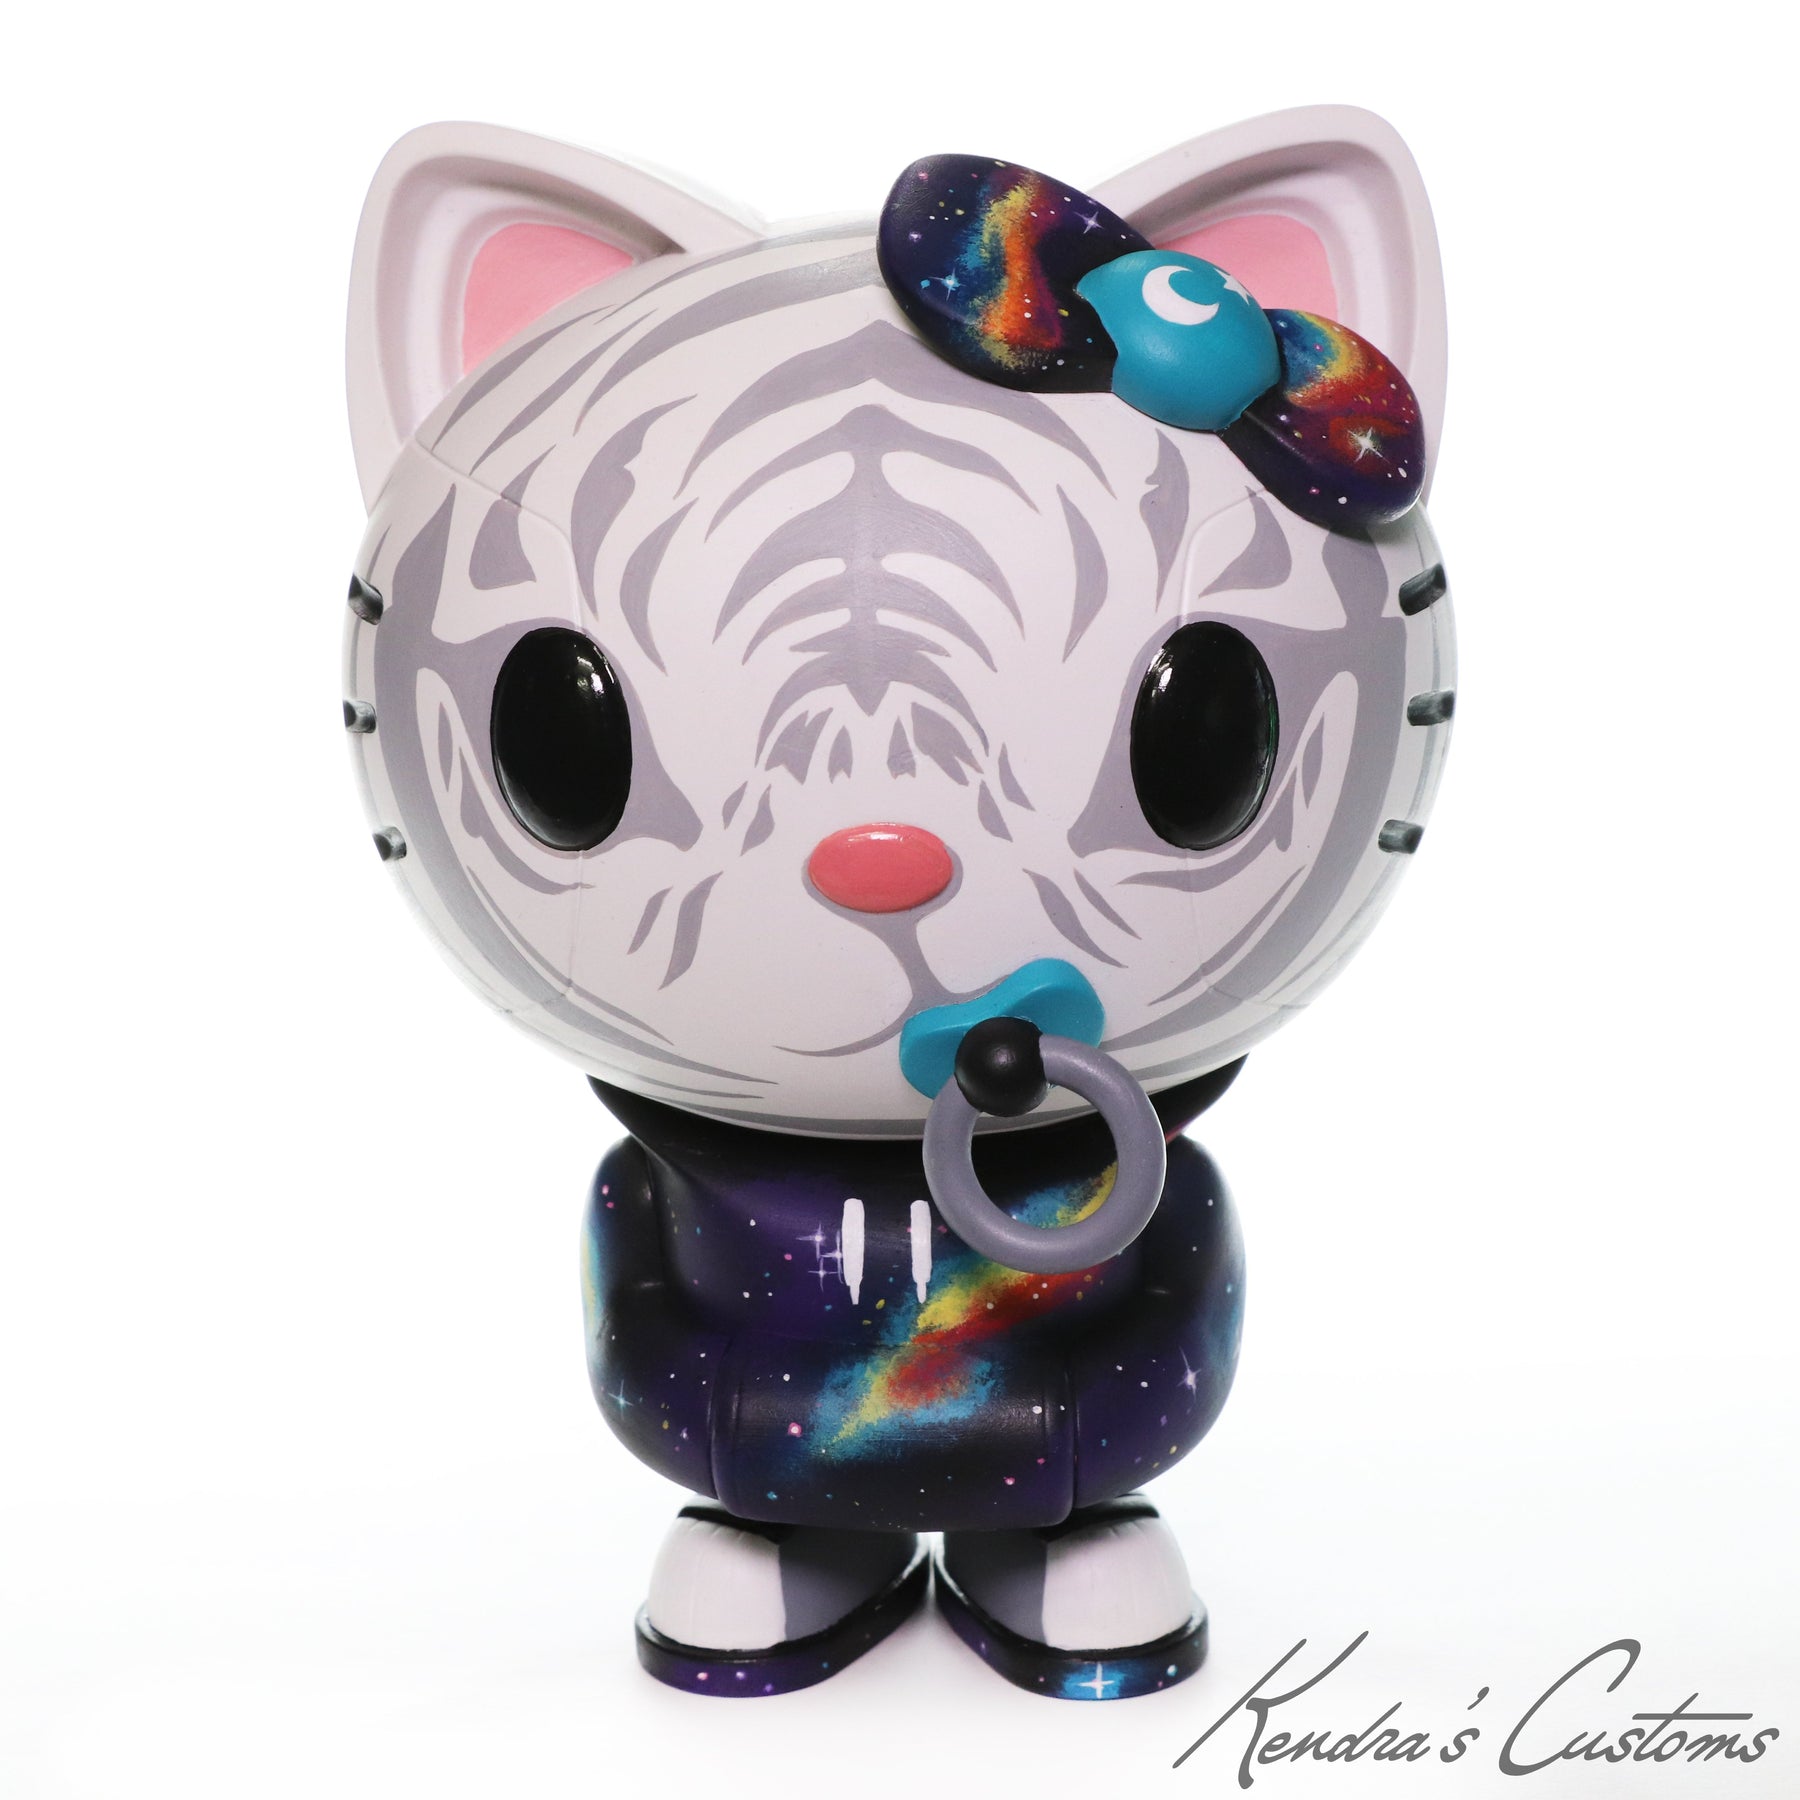 Siberian Tiger Custom 6-inch Quiccs Hello Kitty by Kendra's Customs Available Now